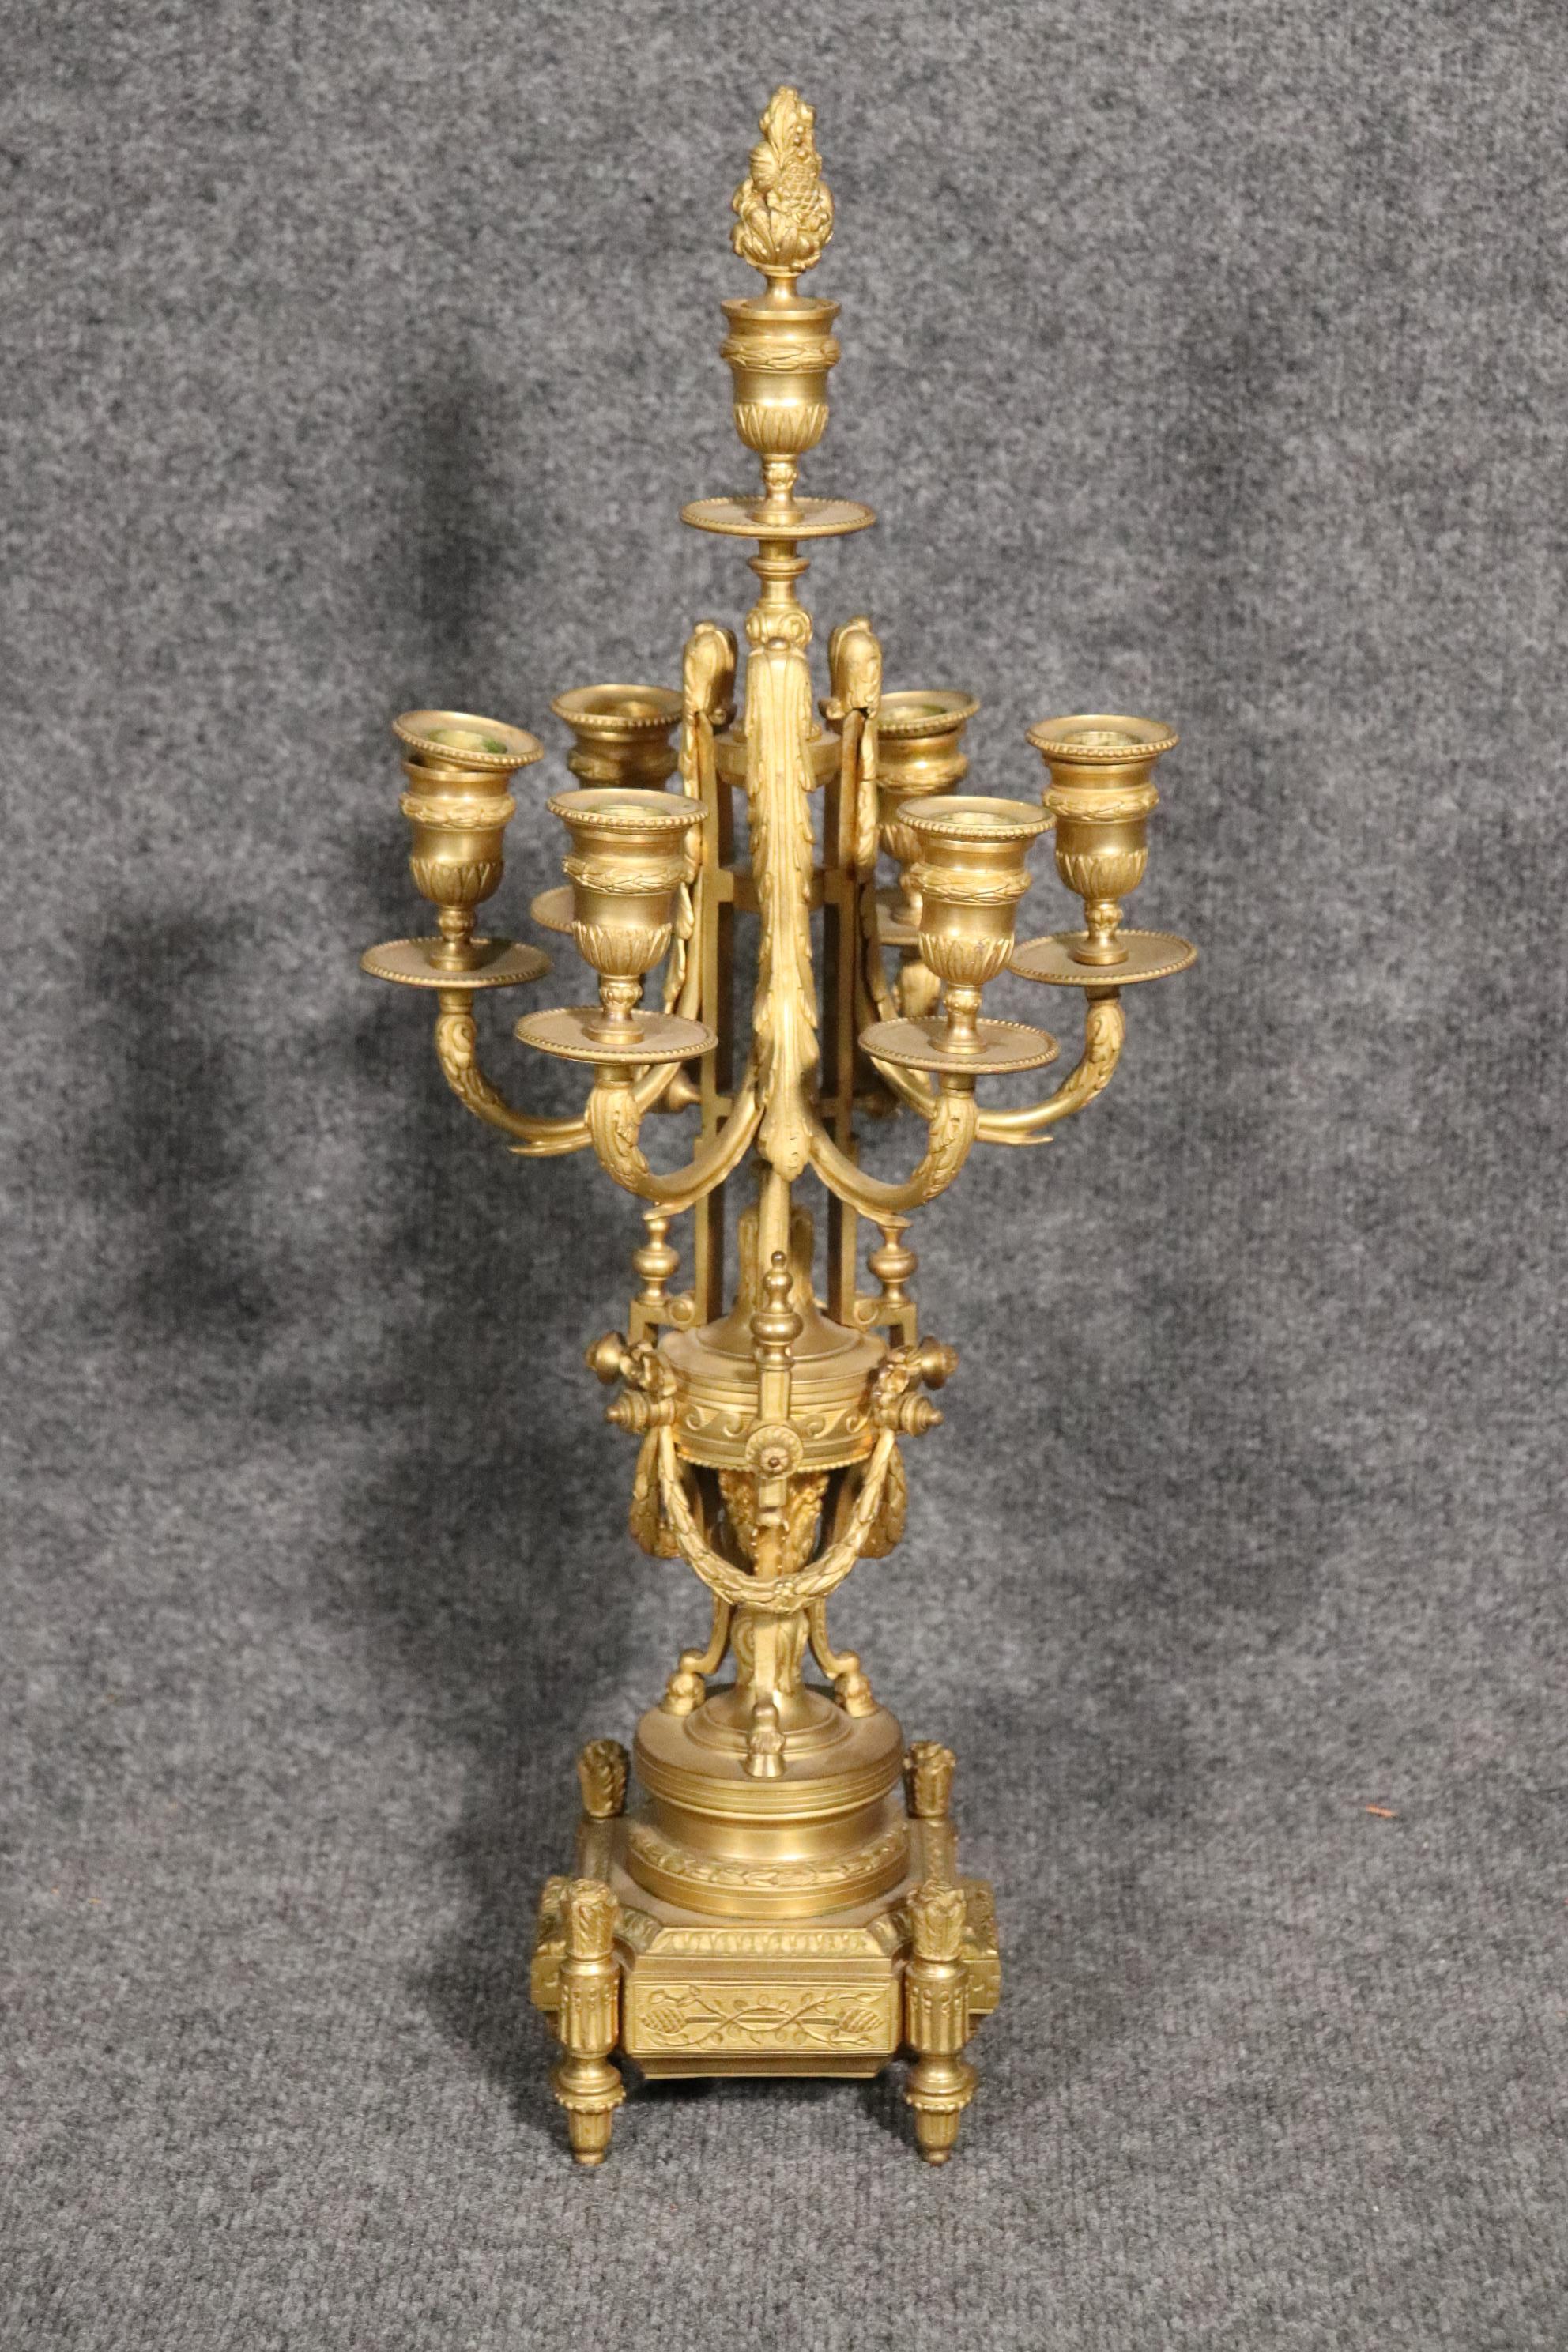 Cast Pair of 19th Century French Louis XVI Style Bronze Ormolu Candelabras For Sale